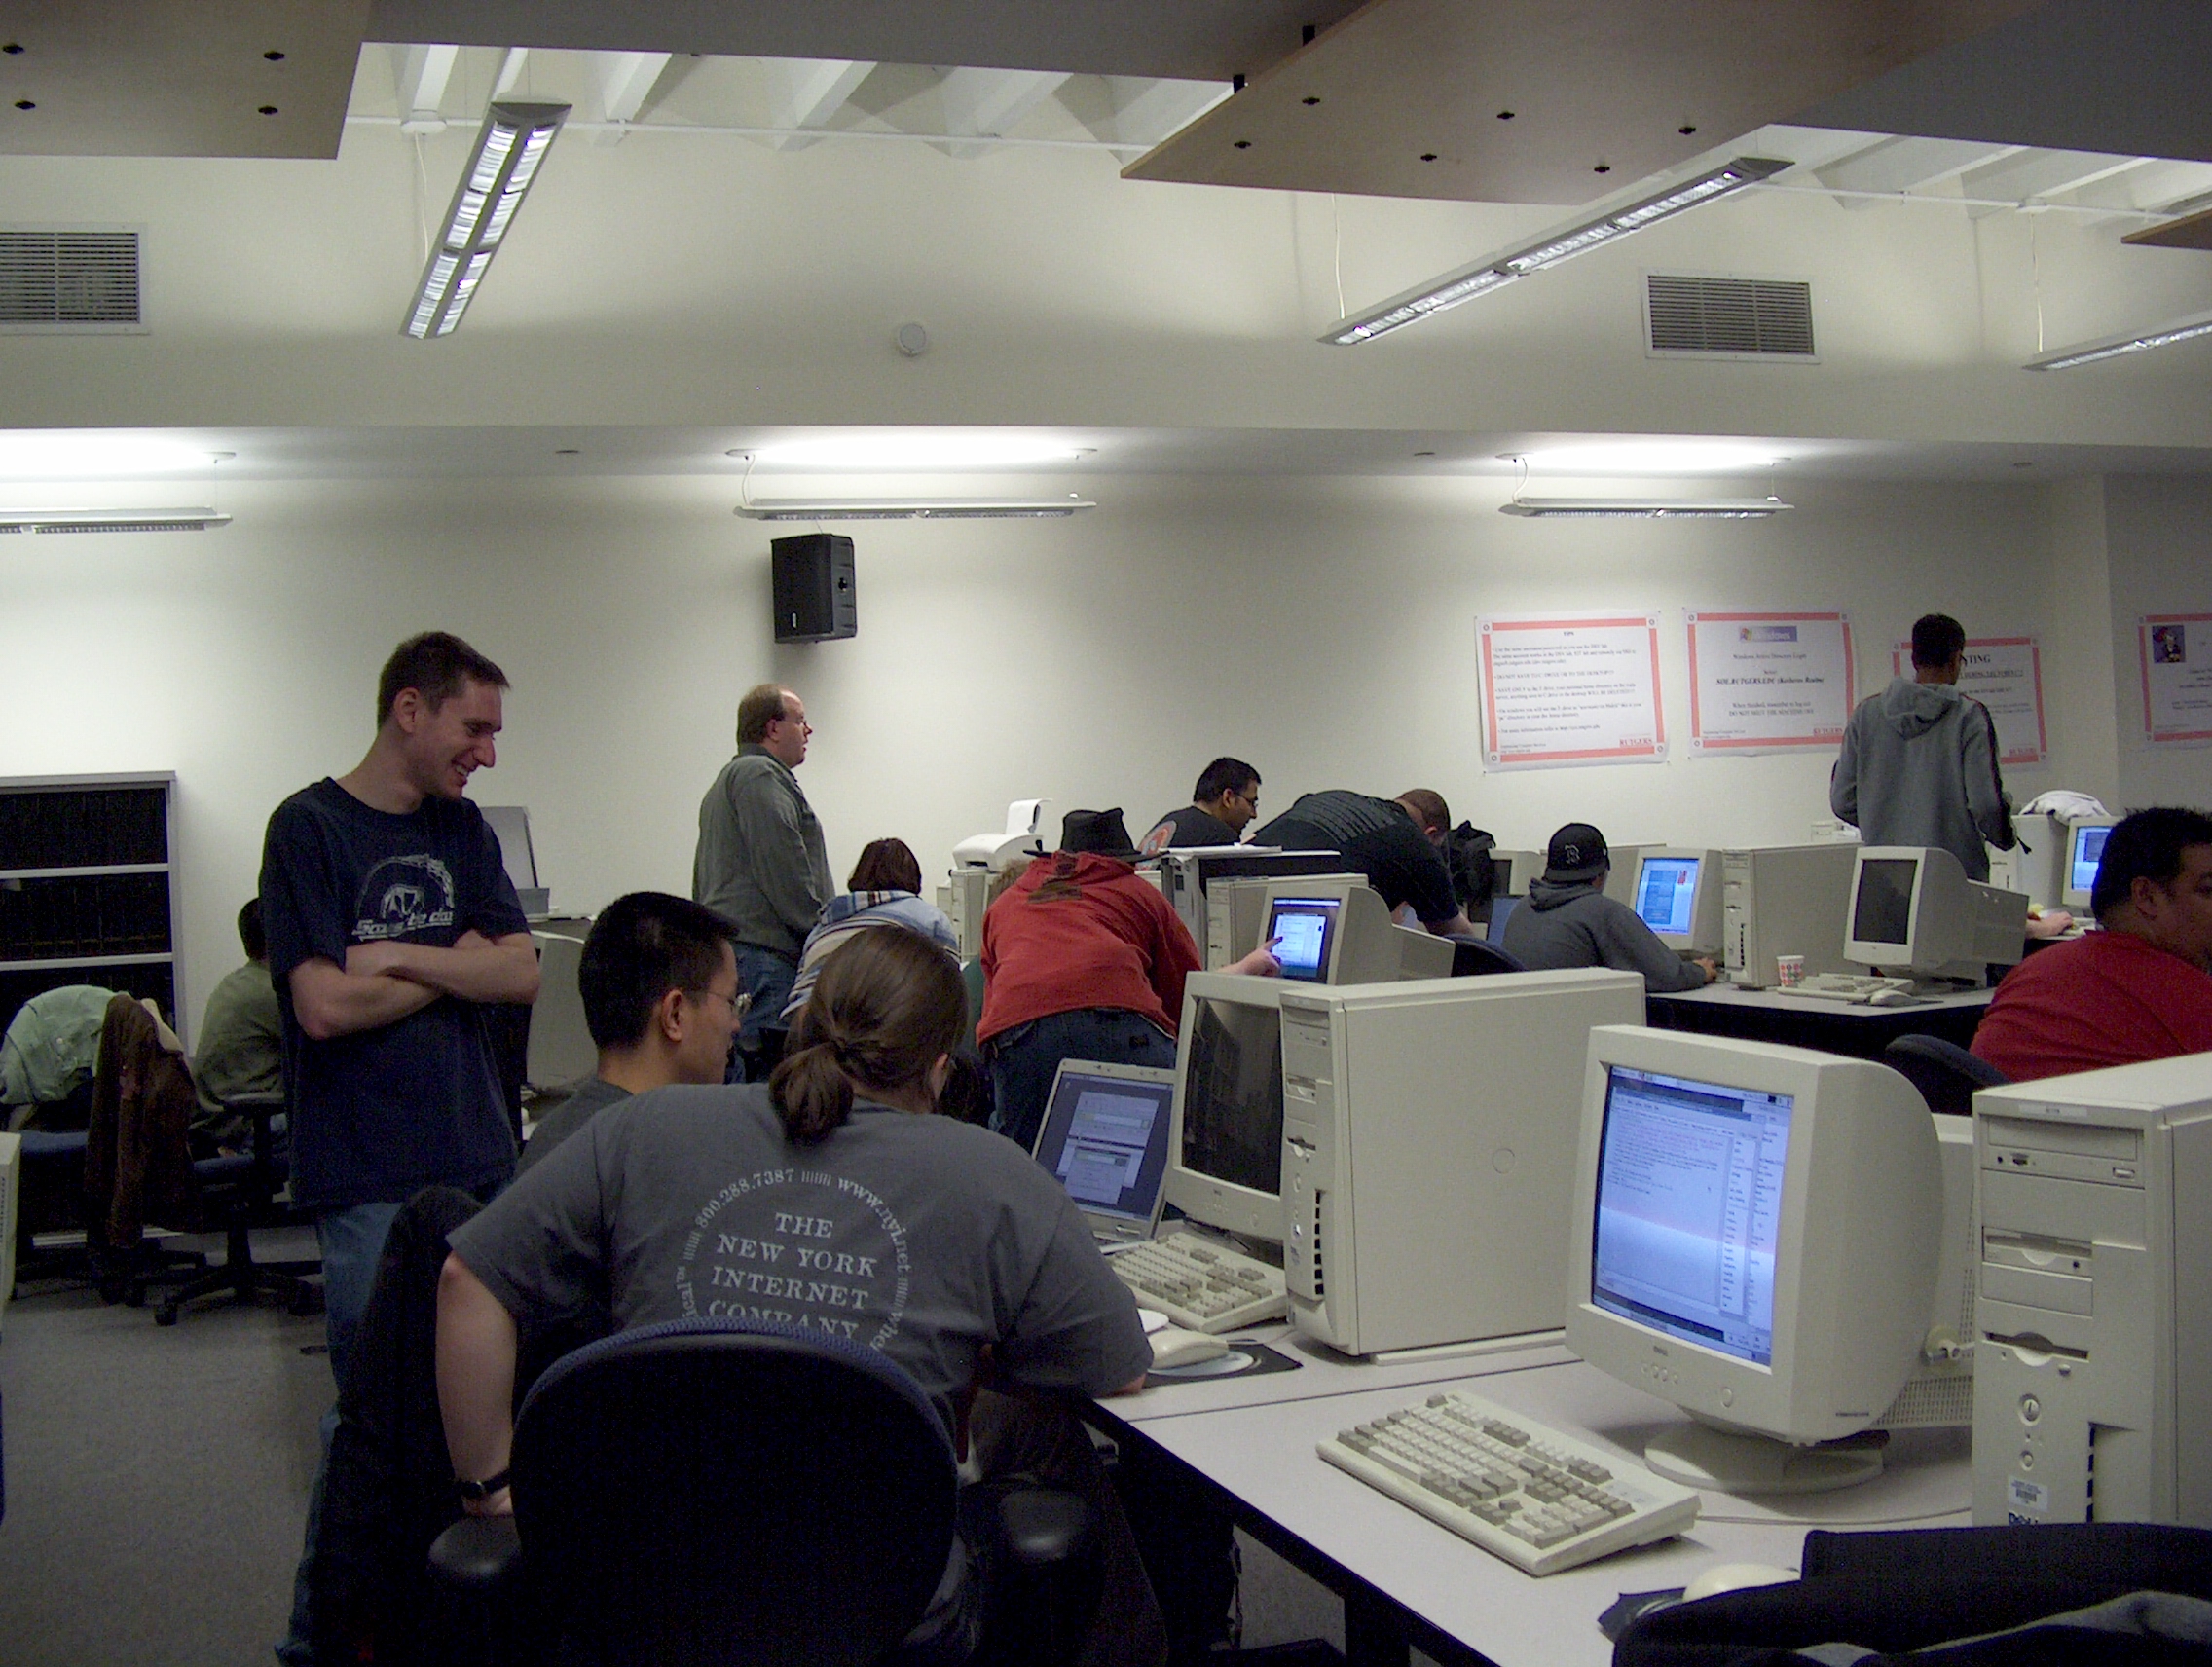 A group of diverse people using computers with the Linux operating system.